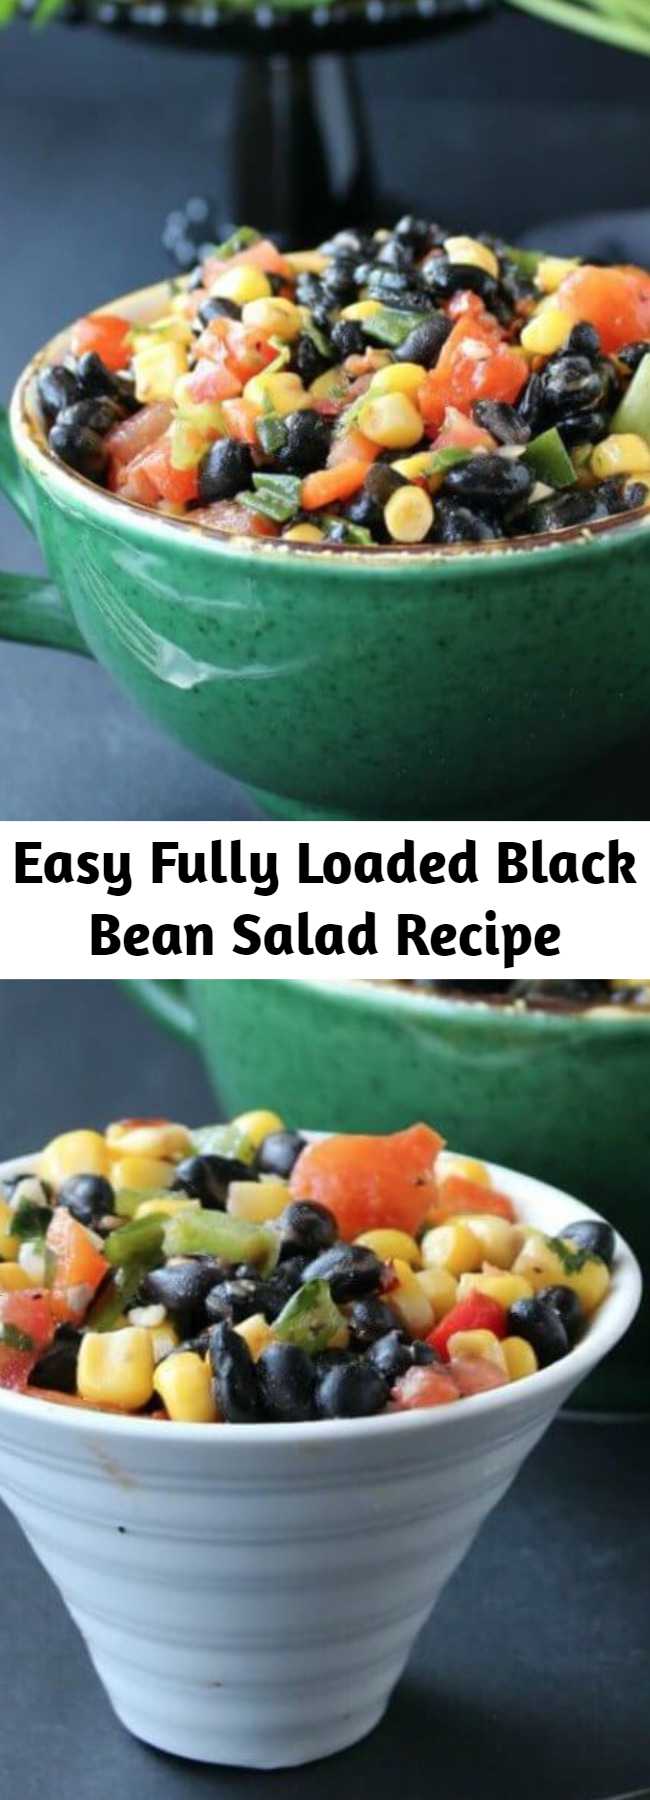 Easy Fully Loaded Black Bean Salad Recipe - Fully Loaded Black Bean Salad is a colorful & flavorful salad. Perfect & easy for potlucks, parties, lunches and anytime! Only 15 minutes. #blackbeanrecipes #cornrecipes #salads #vegansides